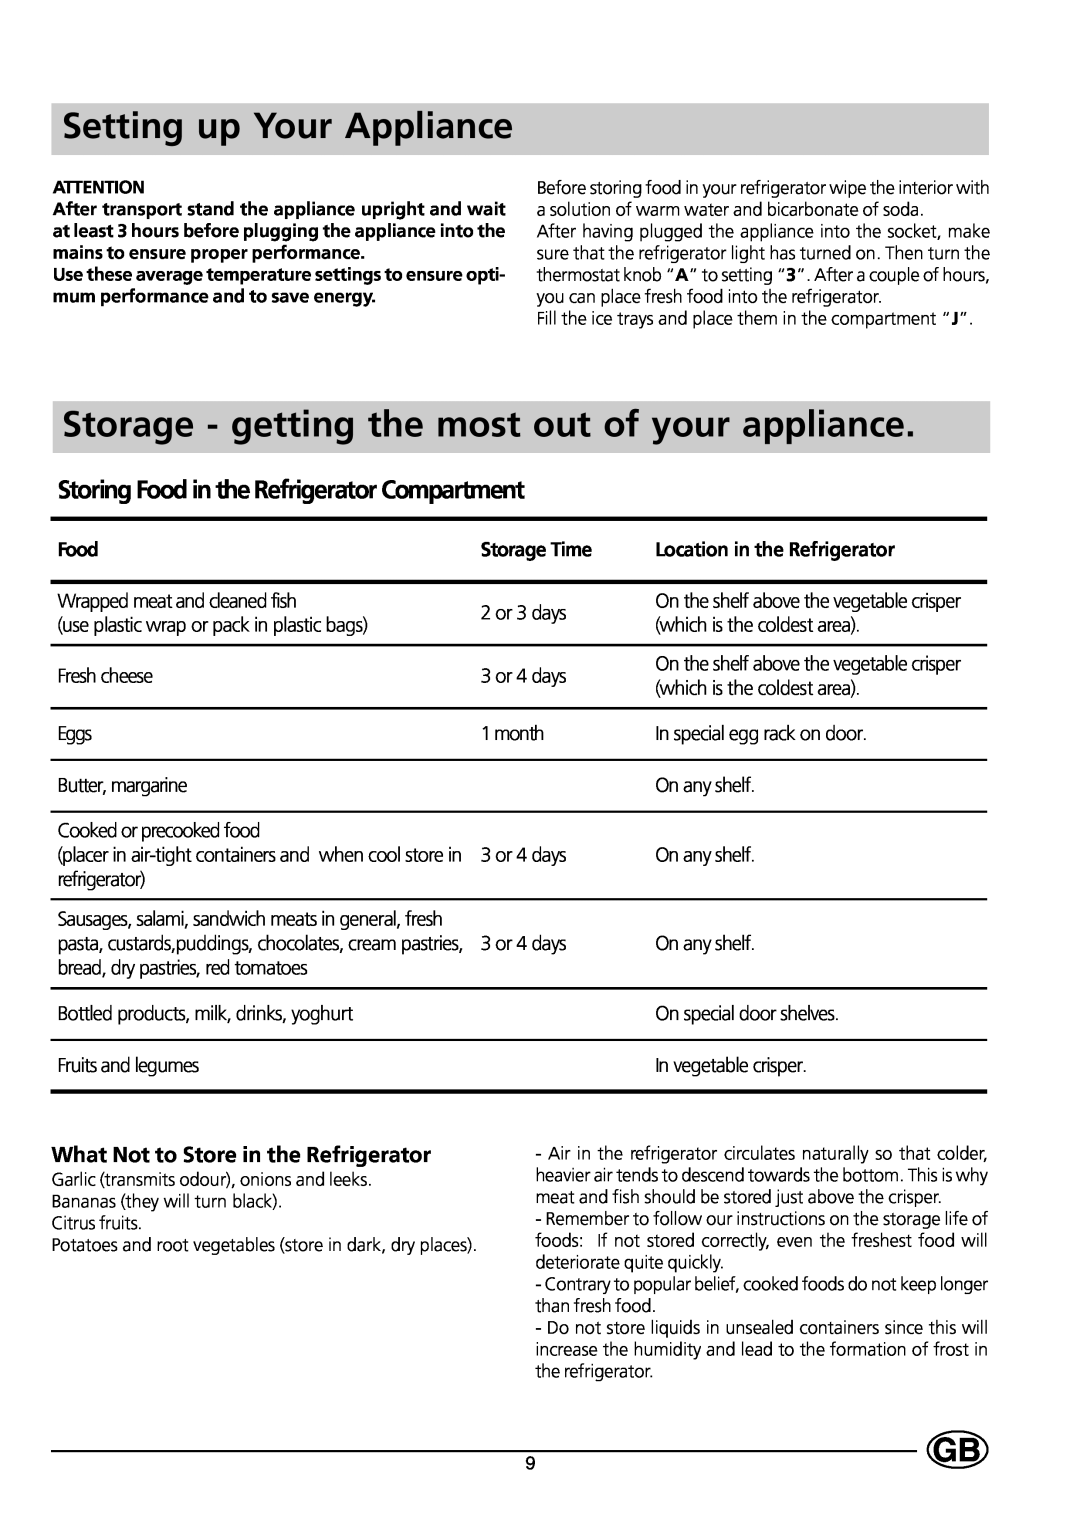 Smeg FR150A manual Setting up Your Appliance, Storage - getting the most out of your appliance 